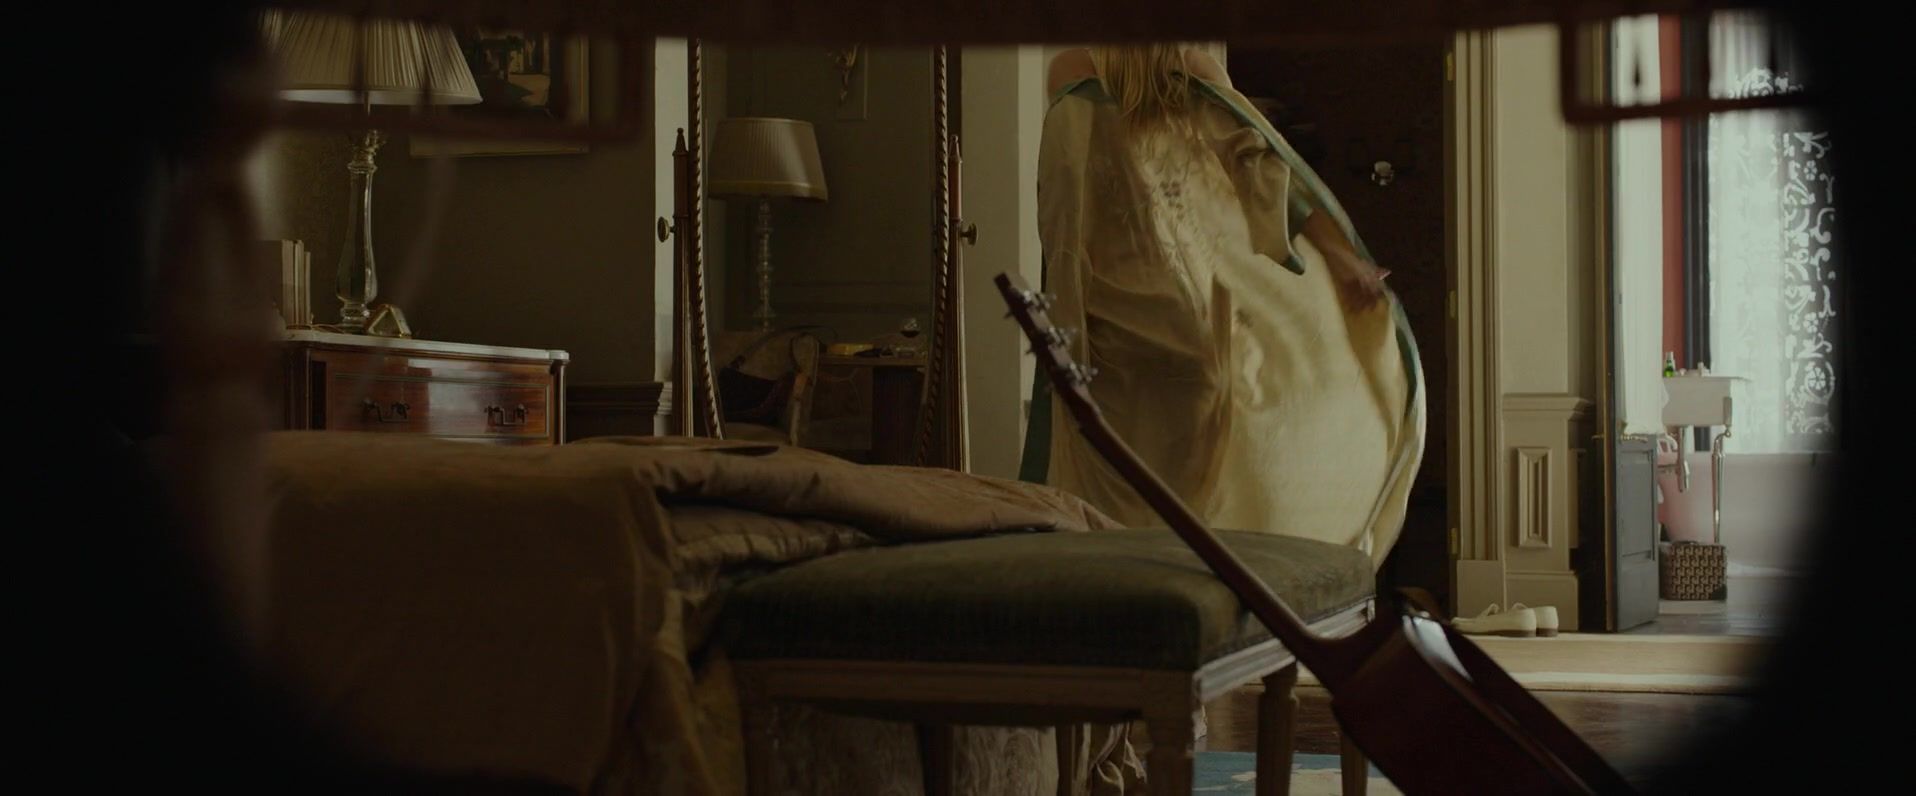 MyEroVideos Melanie Laurent - By The Sea (2015) Big Natural Tits